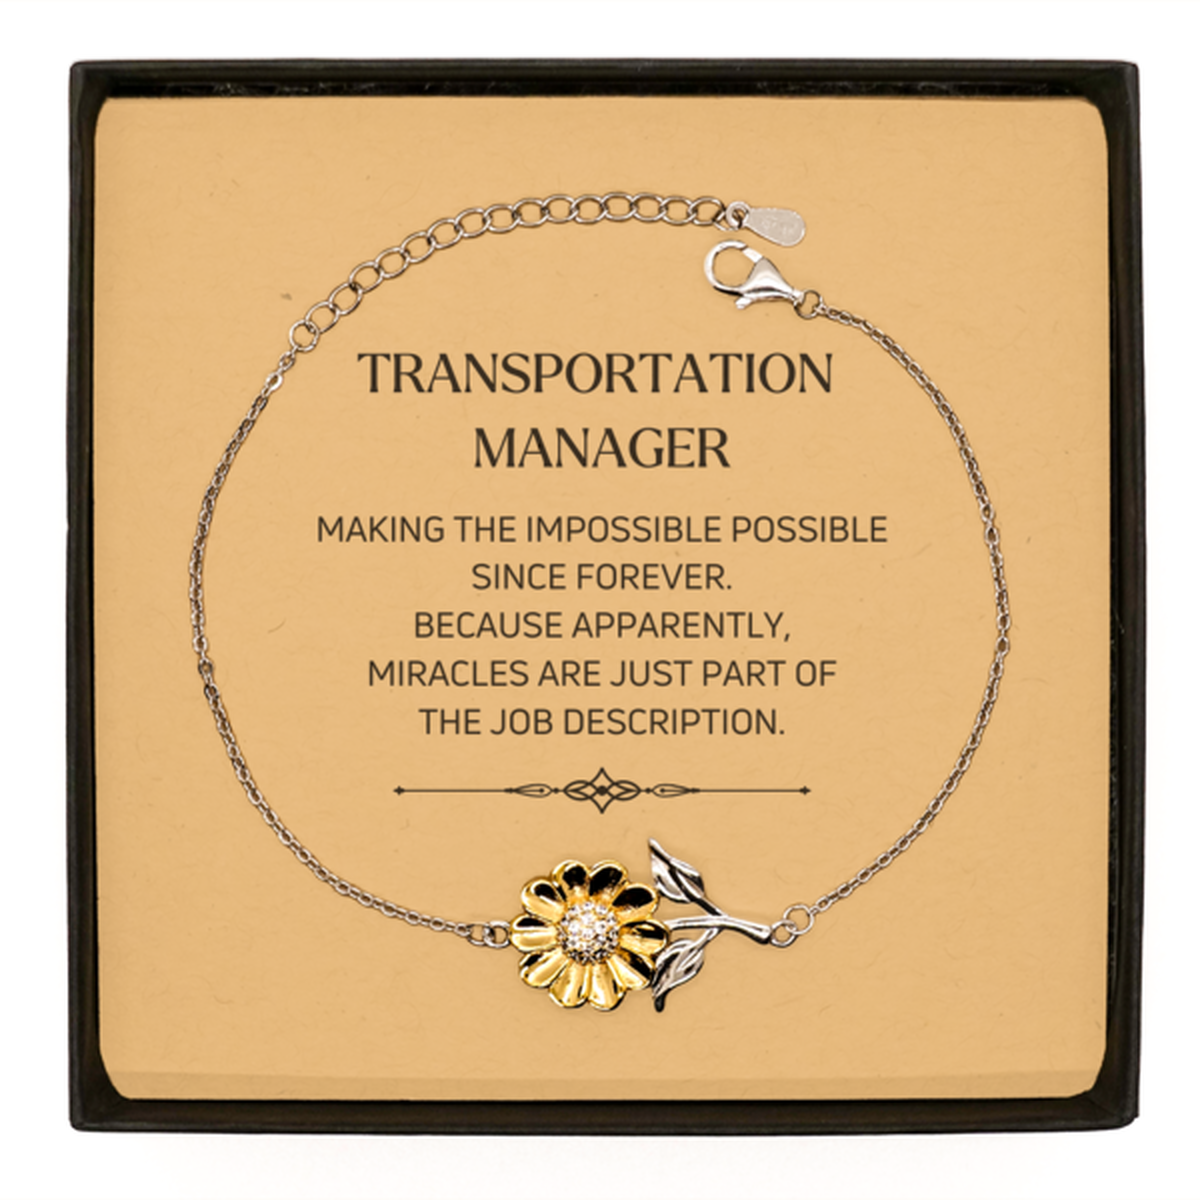 Funny Transportation Manager Gifts, Miracles are just part of the job description, Inspirational Birthday Sunflower Bracelet For Transportation Manager, Men, Women, Coworkers, Friends, Boss